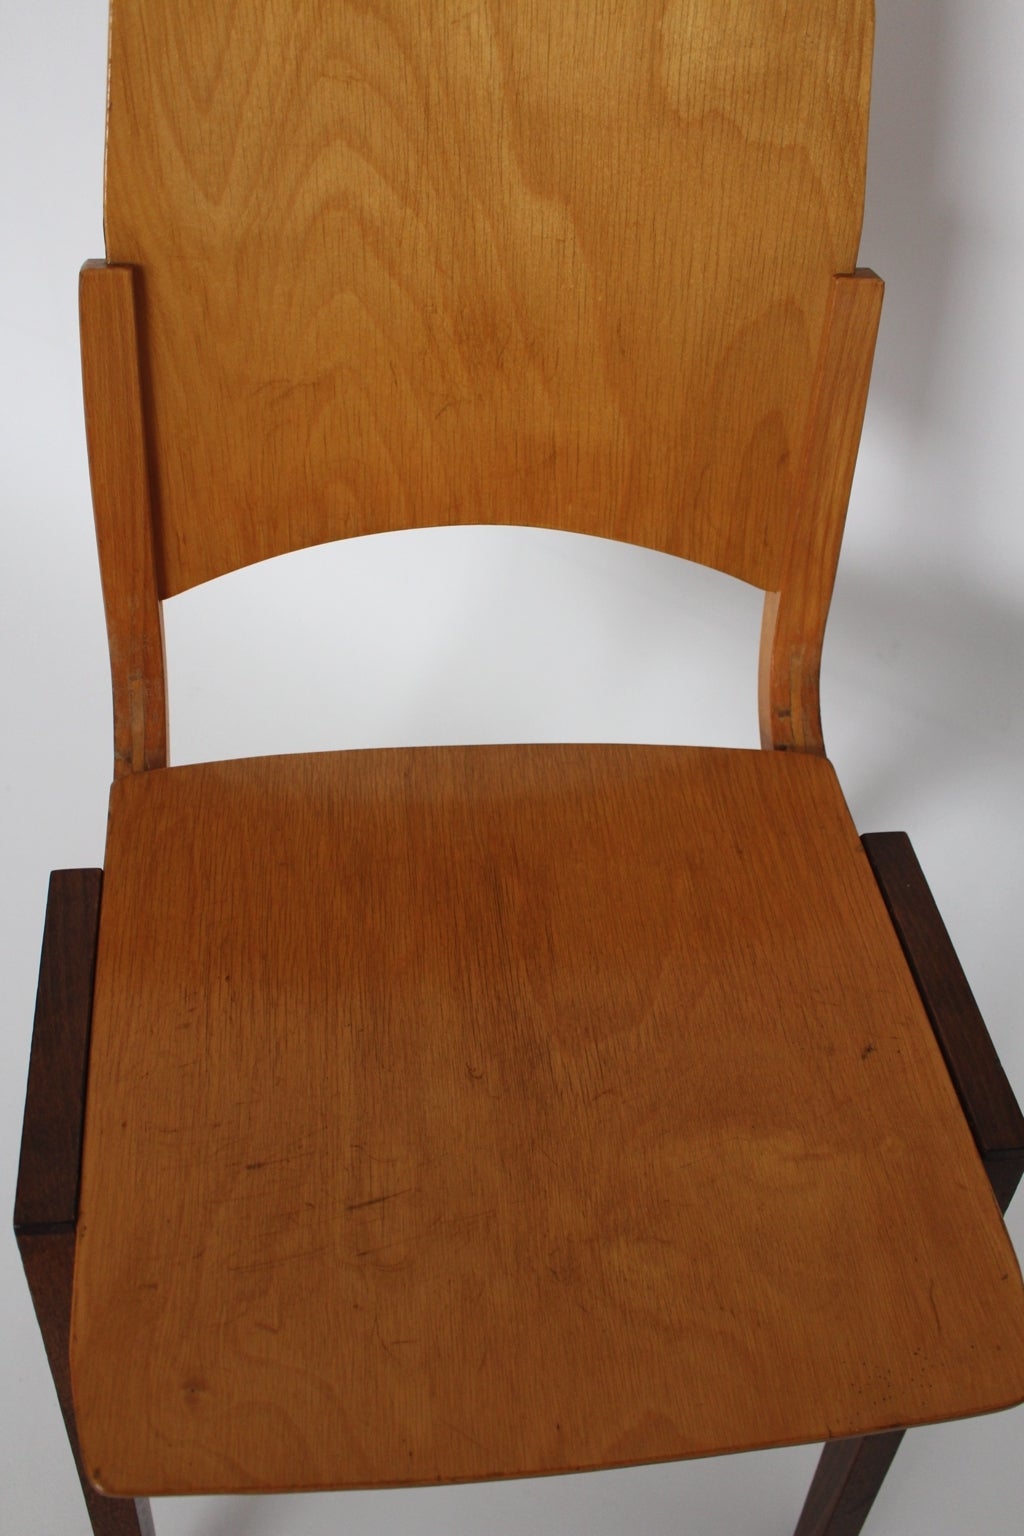 Mid-20th Century  Mid Century Modern Dining Room Chairs by Roland Rainer 1952 Vienna Austria For Sale